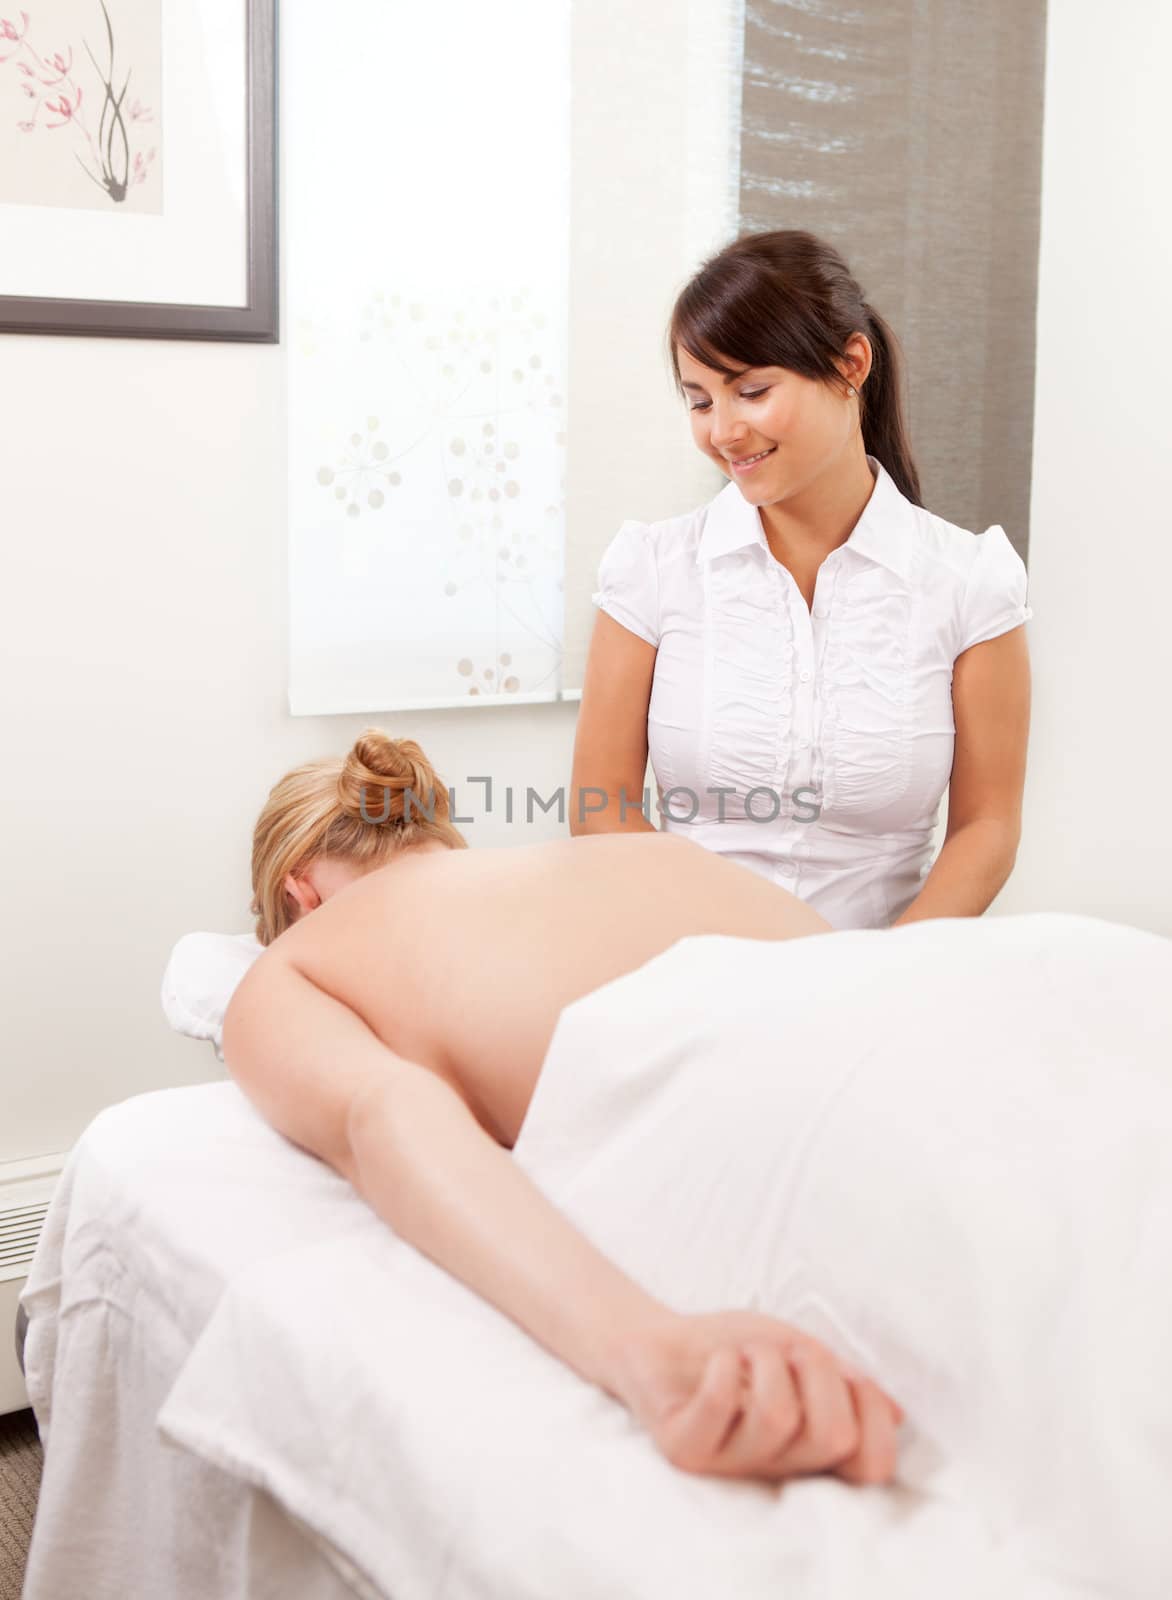 A female acupuncturist looks down on patient ready for therapy